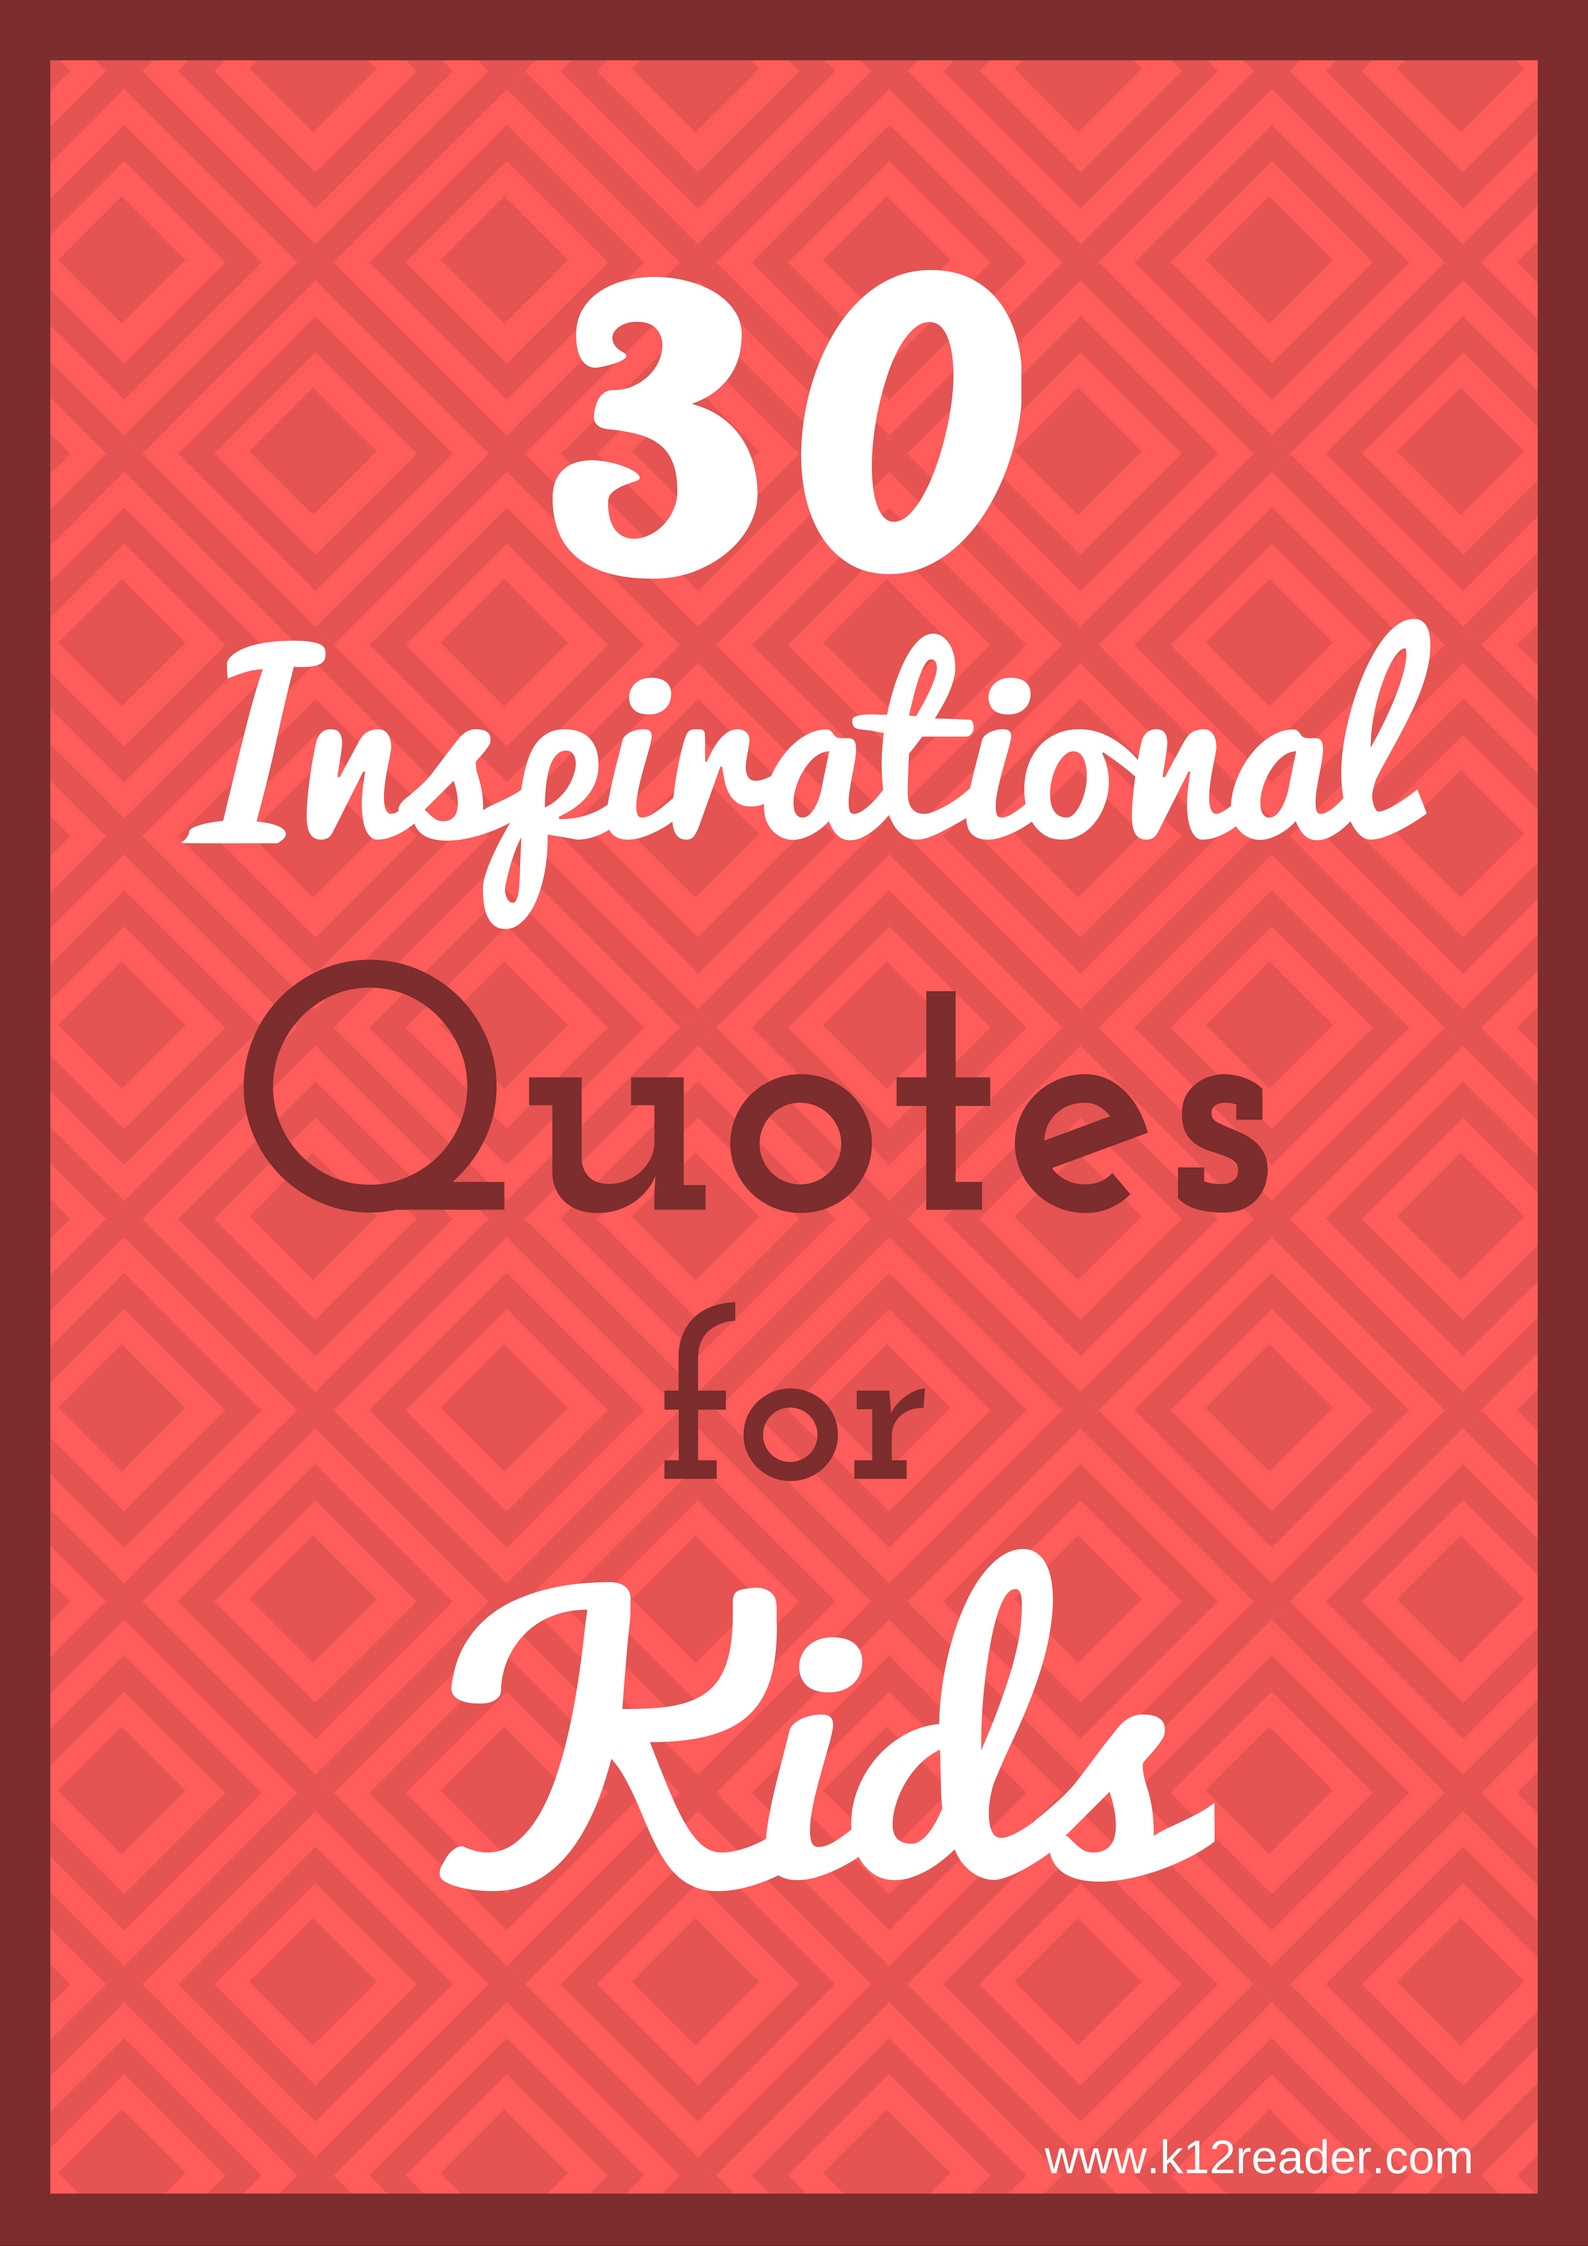 Positive Quotes For Children
 30 Inspirational Quotes for Kids